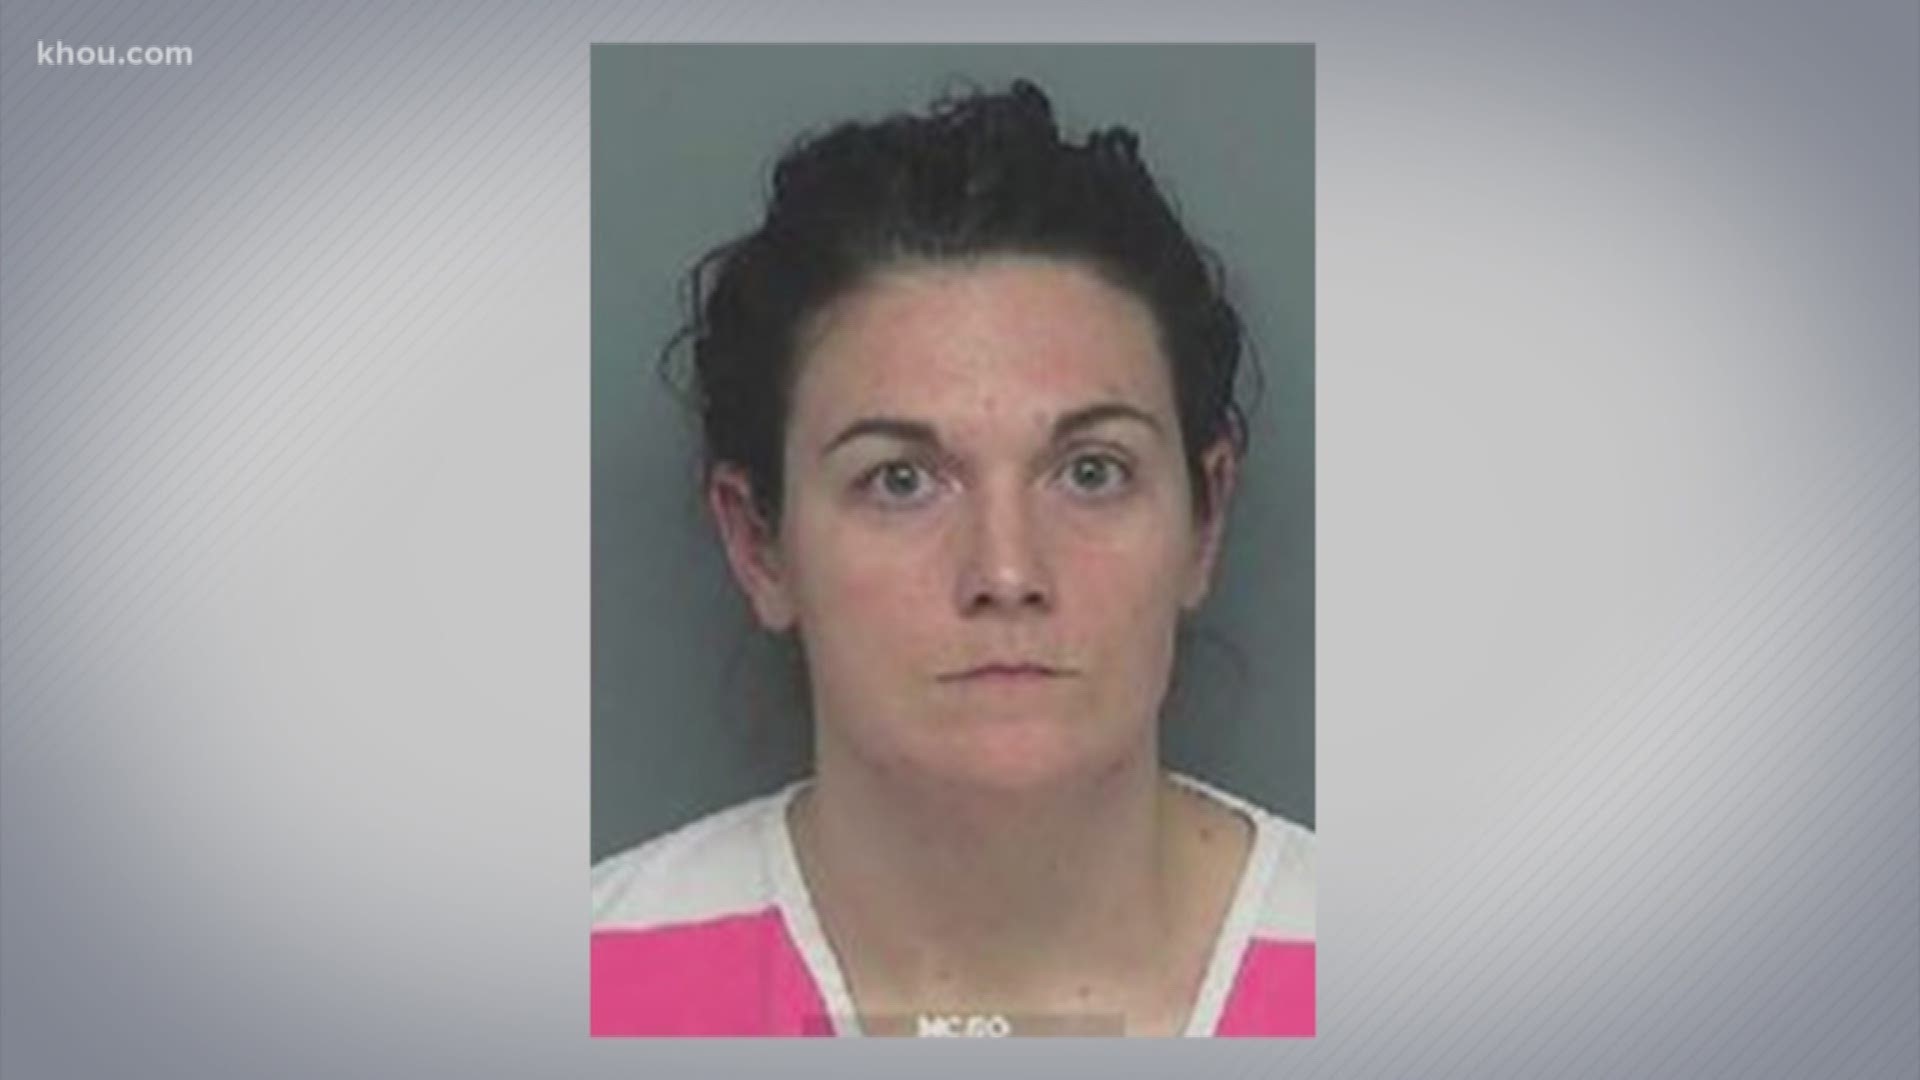 A Woodlands Christian Academy teacher is accused of having an improper relationship with a female student.